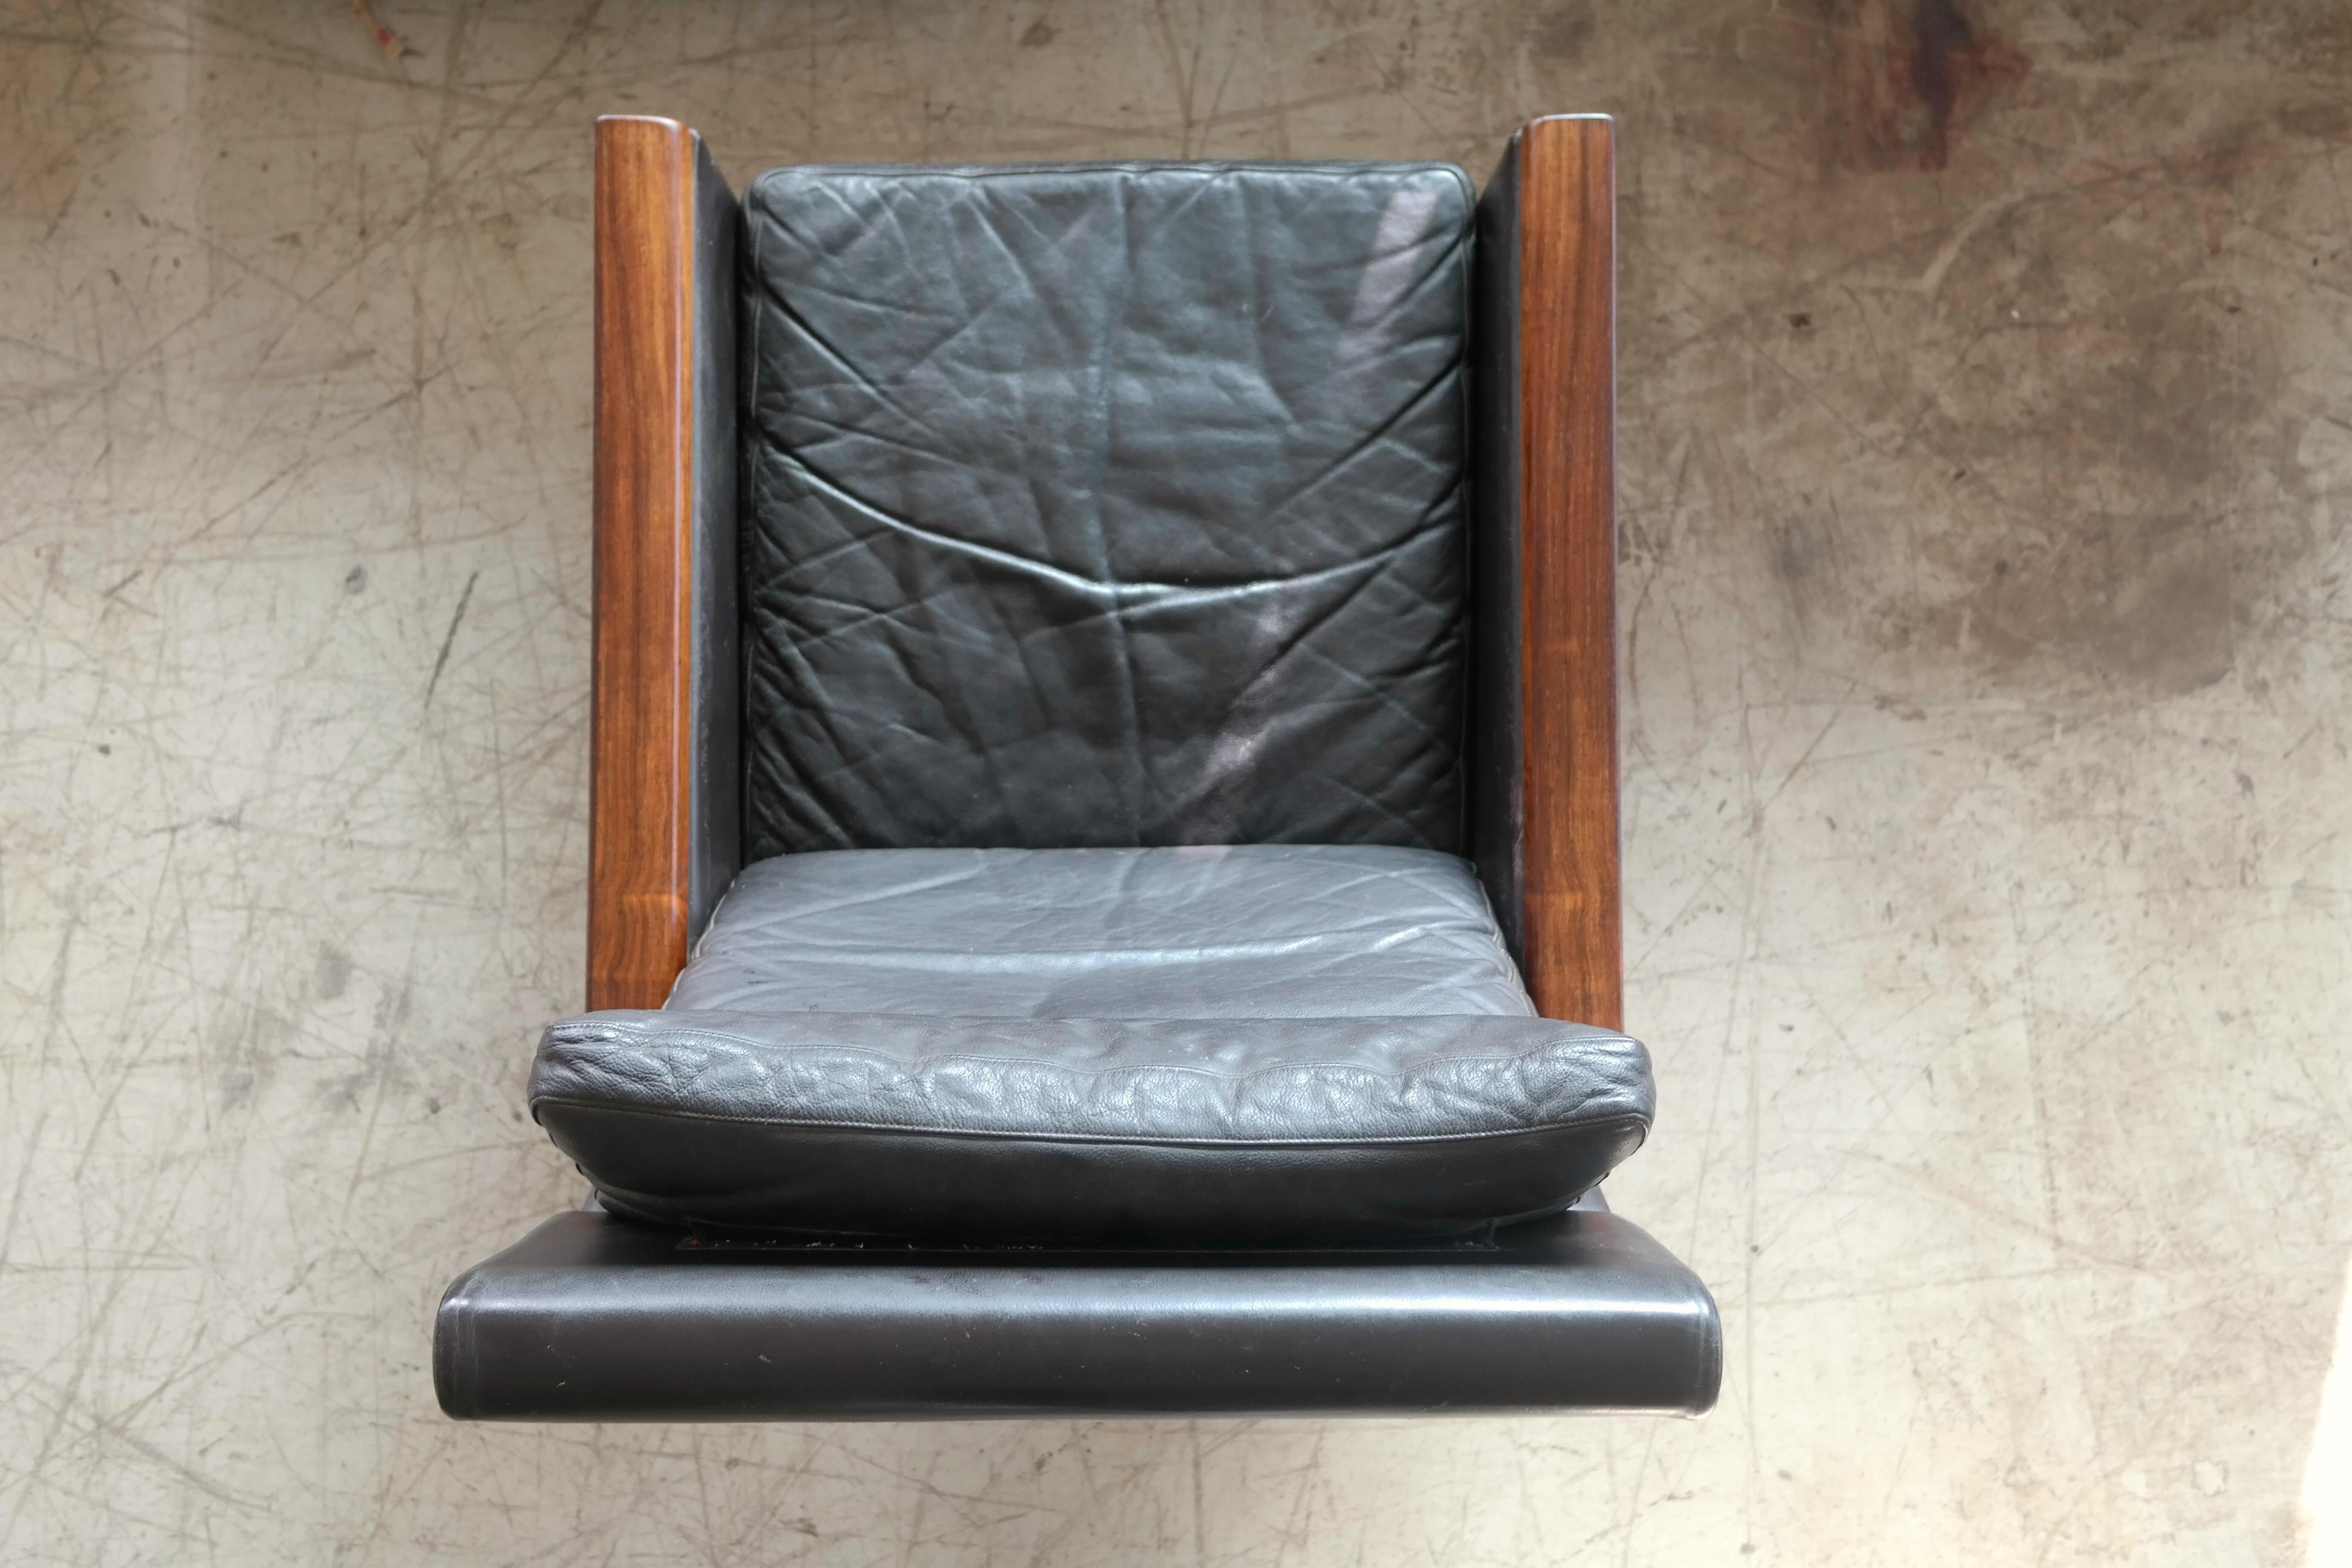 Mid-Century Modern Danish Midcentury High Back Lounge Chair in Leather and Rosewood by Erik Wørts